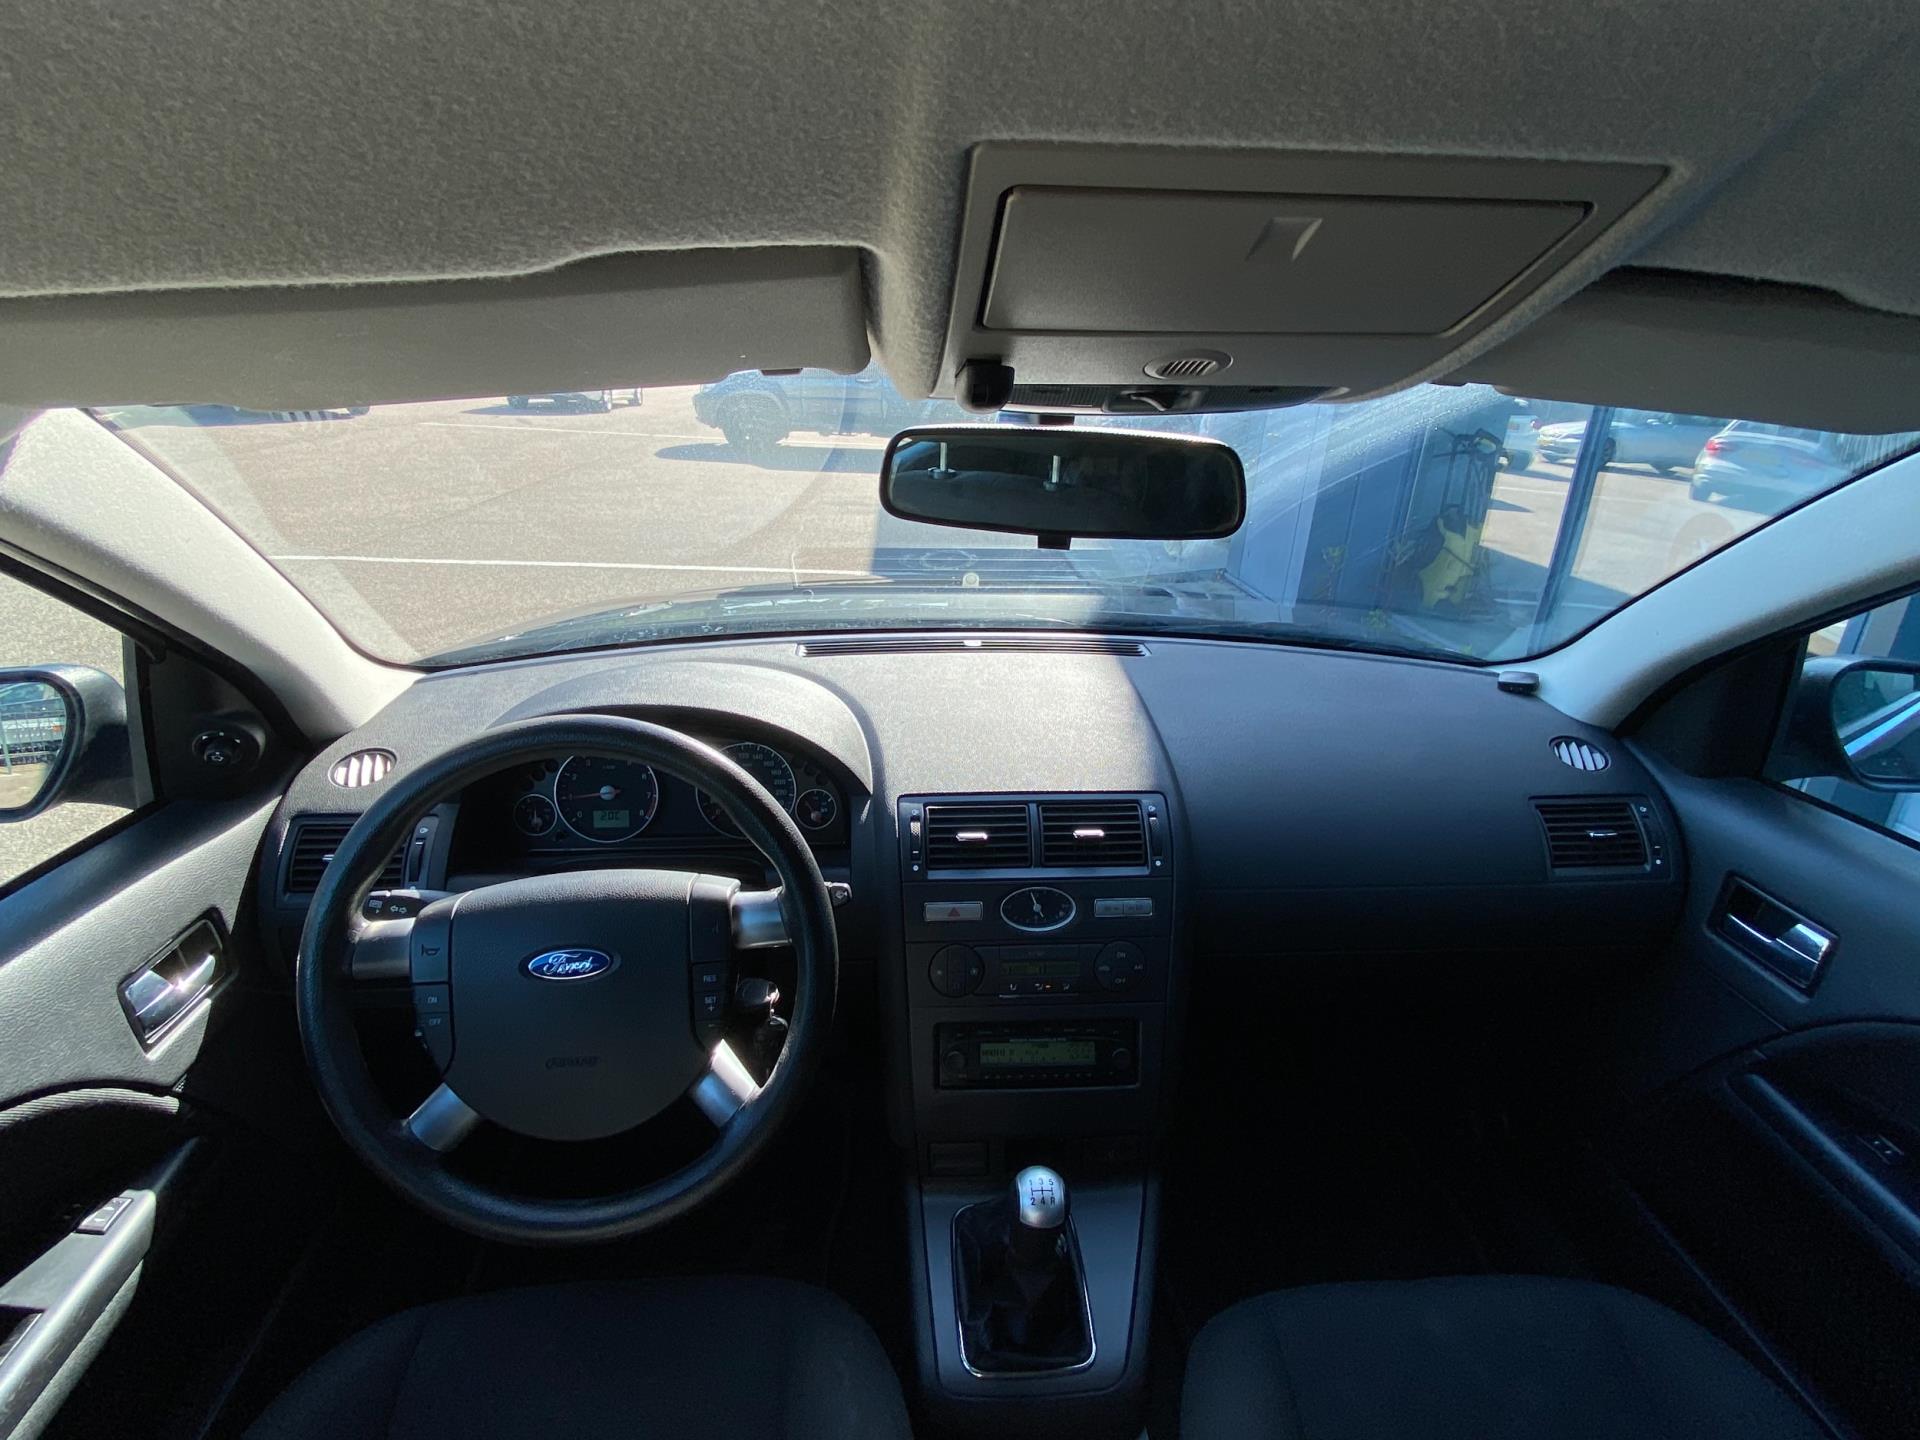 ford-mondeo-image10.jpg